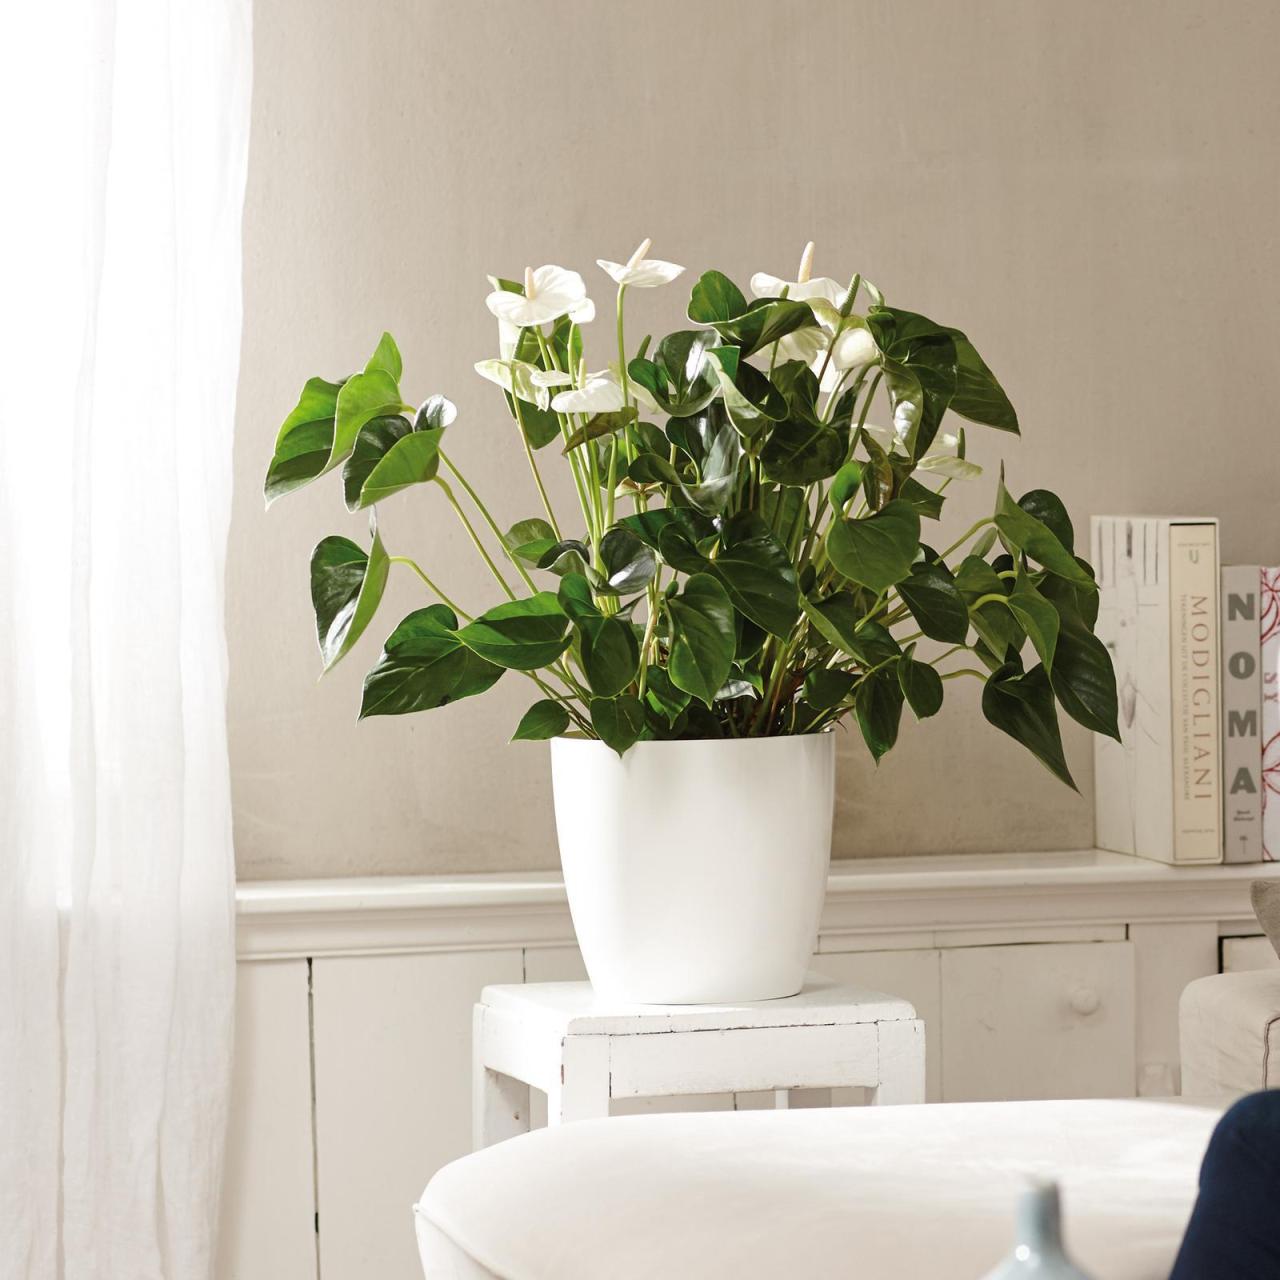 Hanging Plants Indoor | Bunnings White Pots: A Versatile Decor Solution for Every Space